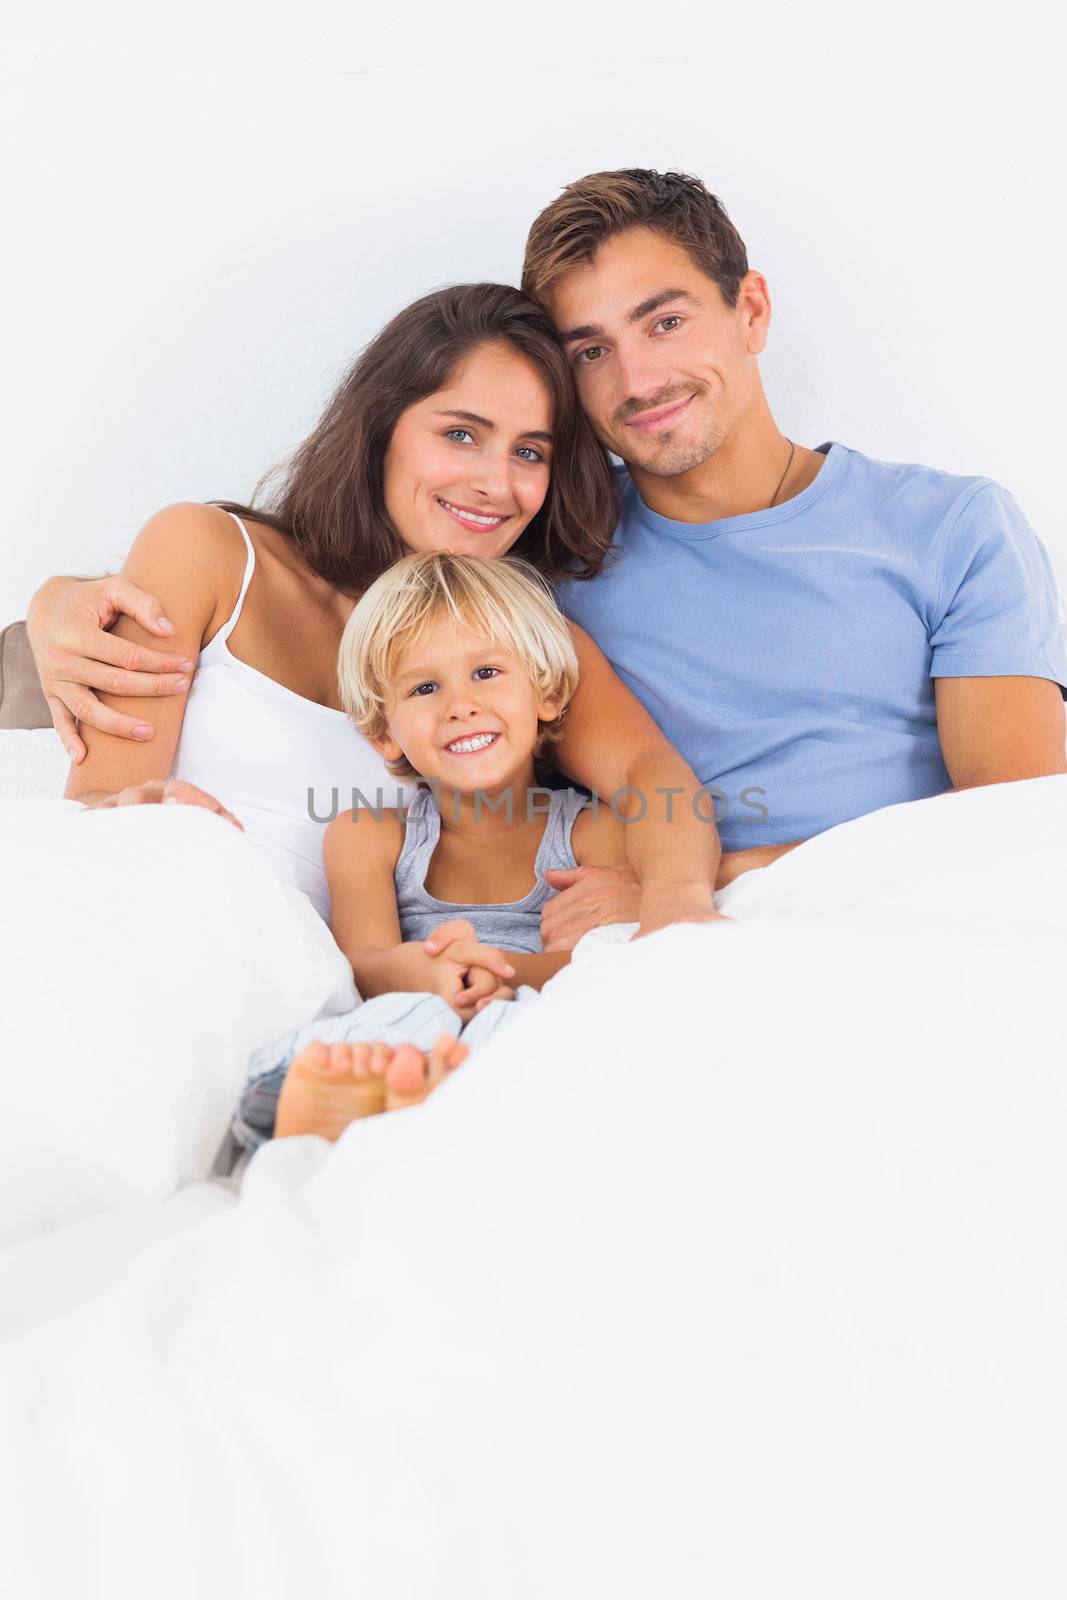 Lovely family embracing on the bed